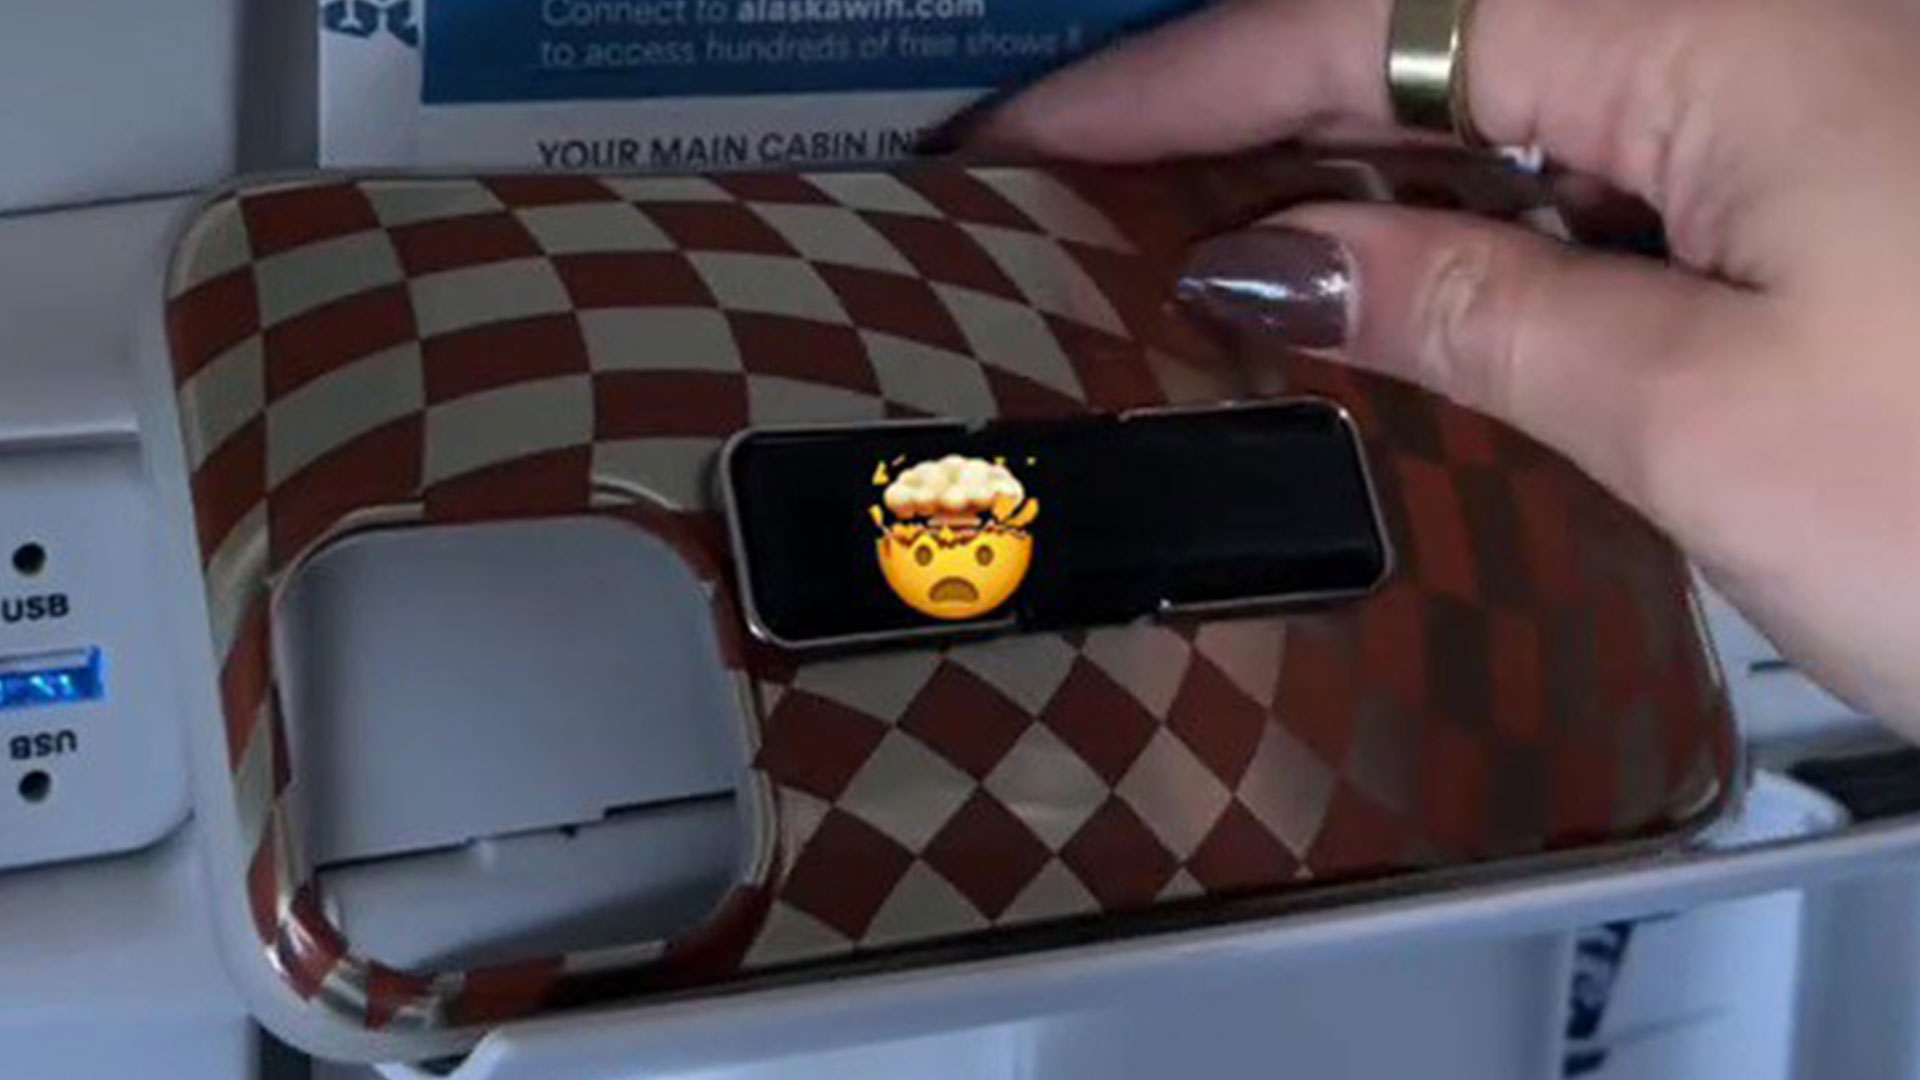 A woman discovers a clever plane seat trick that allows her to watch movies on her phone while flying